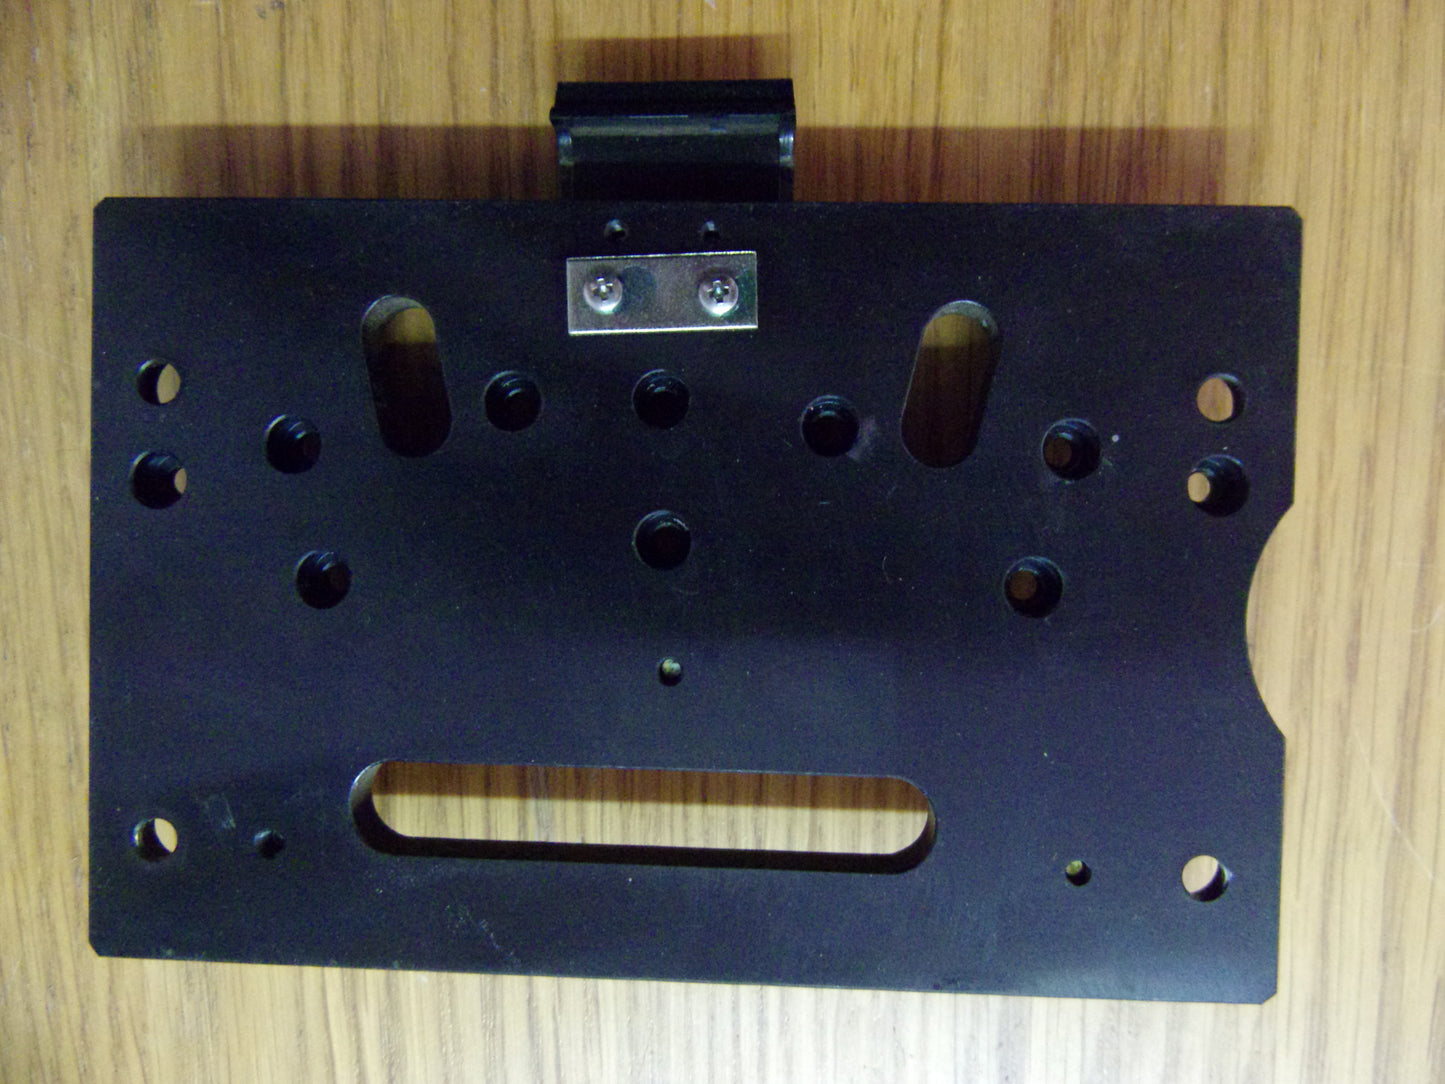 Teac 80-8 head block without the hum shield